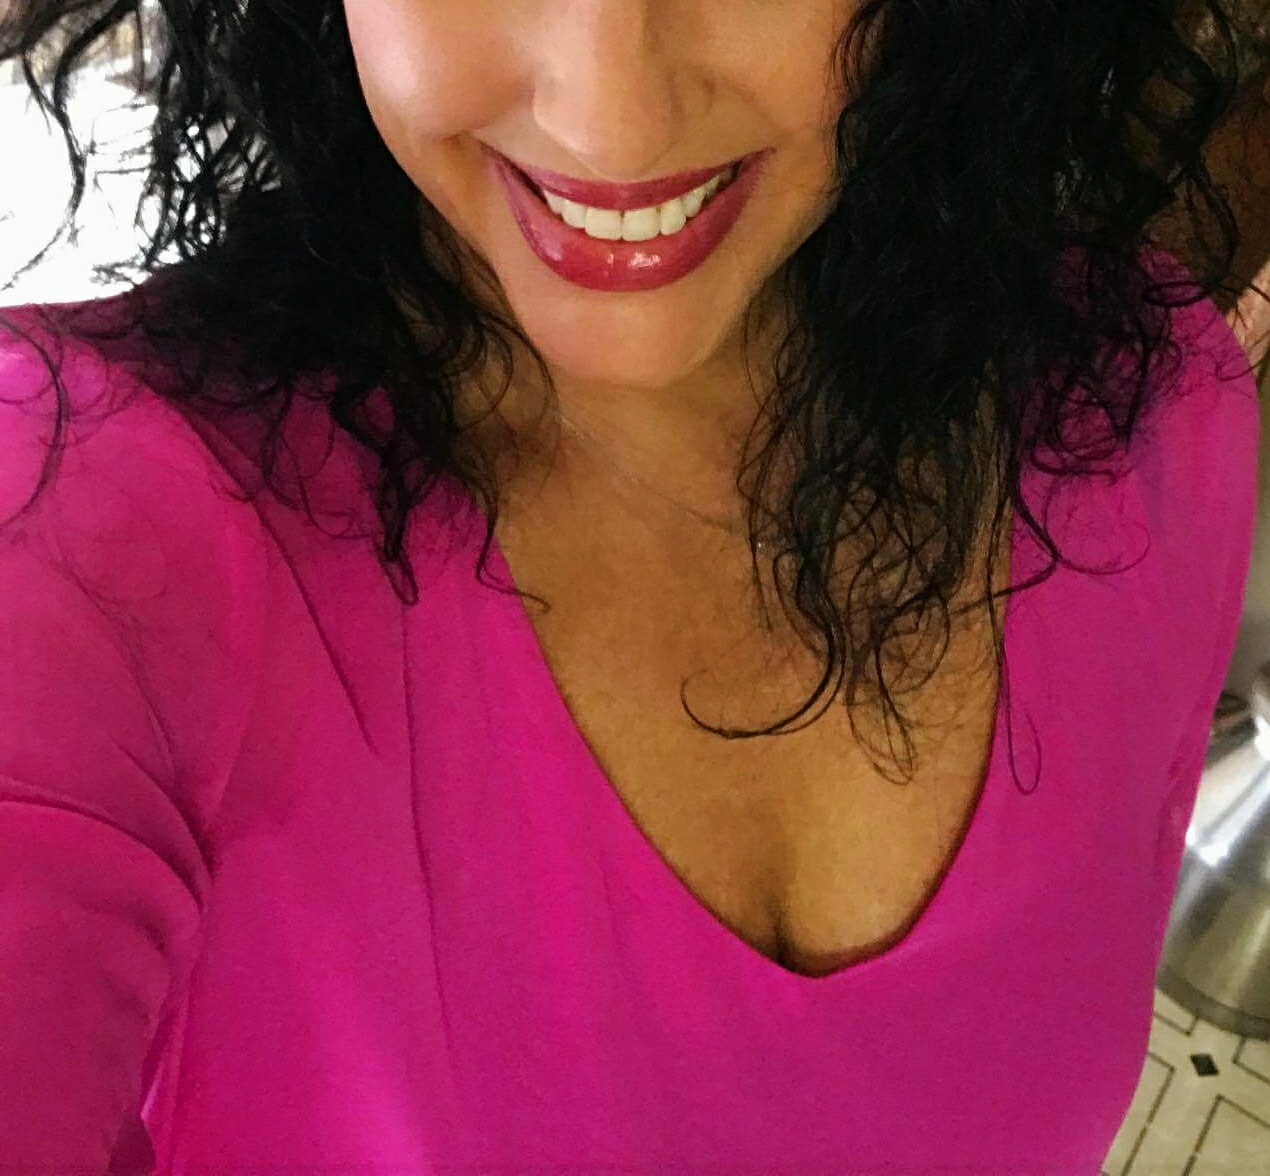 lilmisssuckit777:  4-13-2017  Spring colors in full effect today!  Feeling naughty!